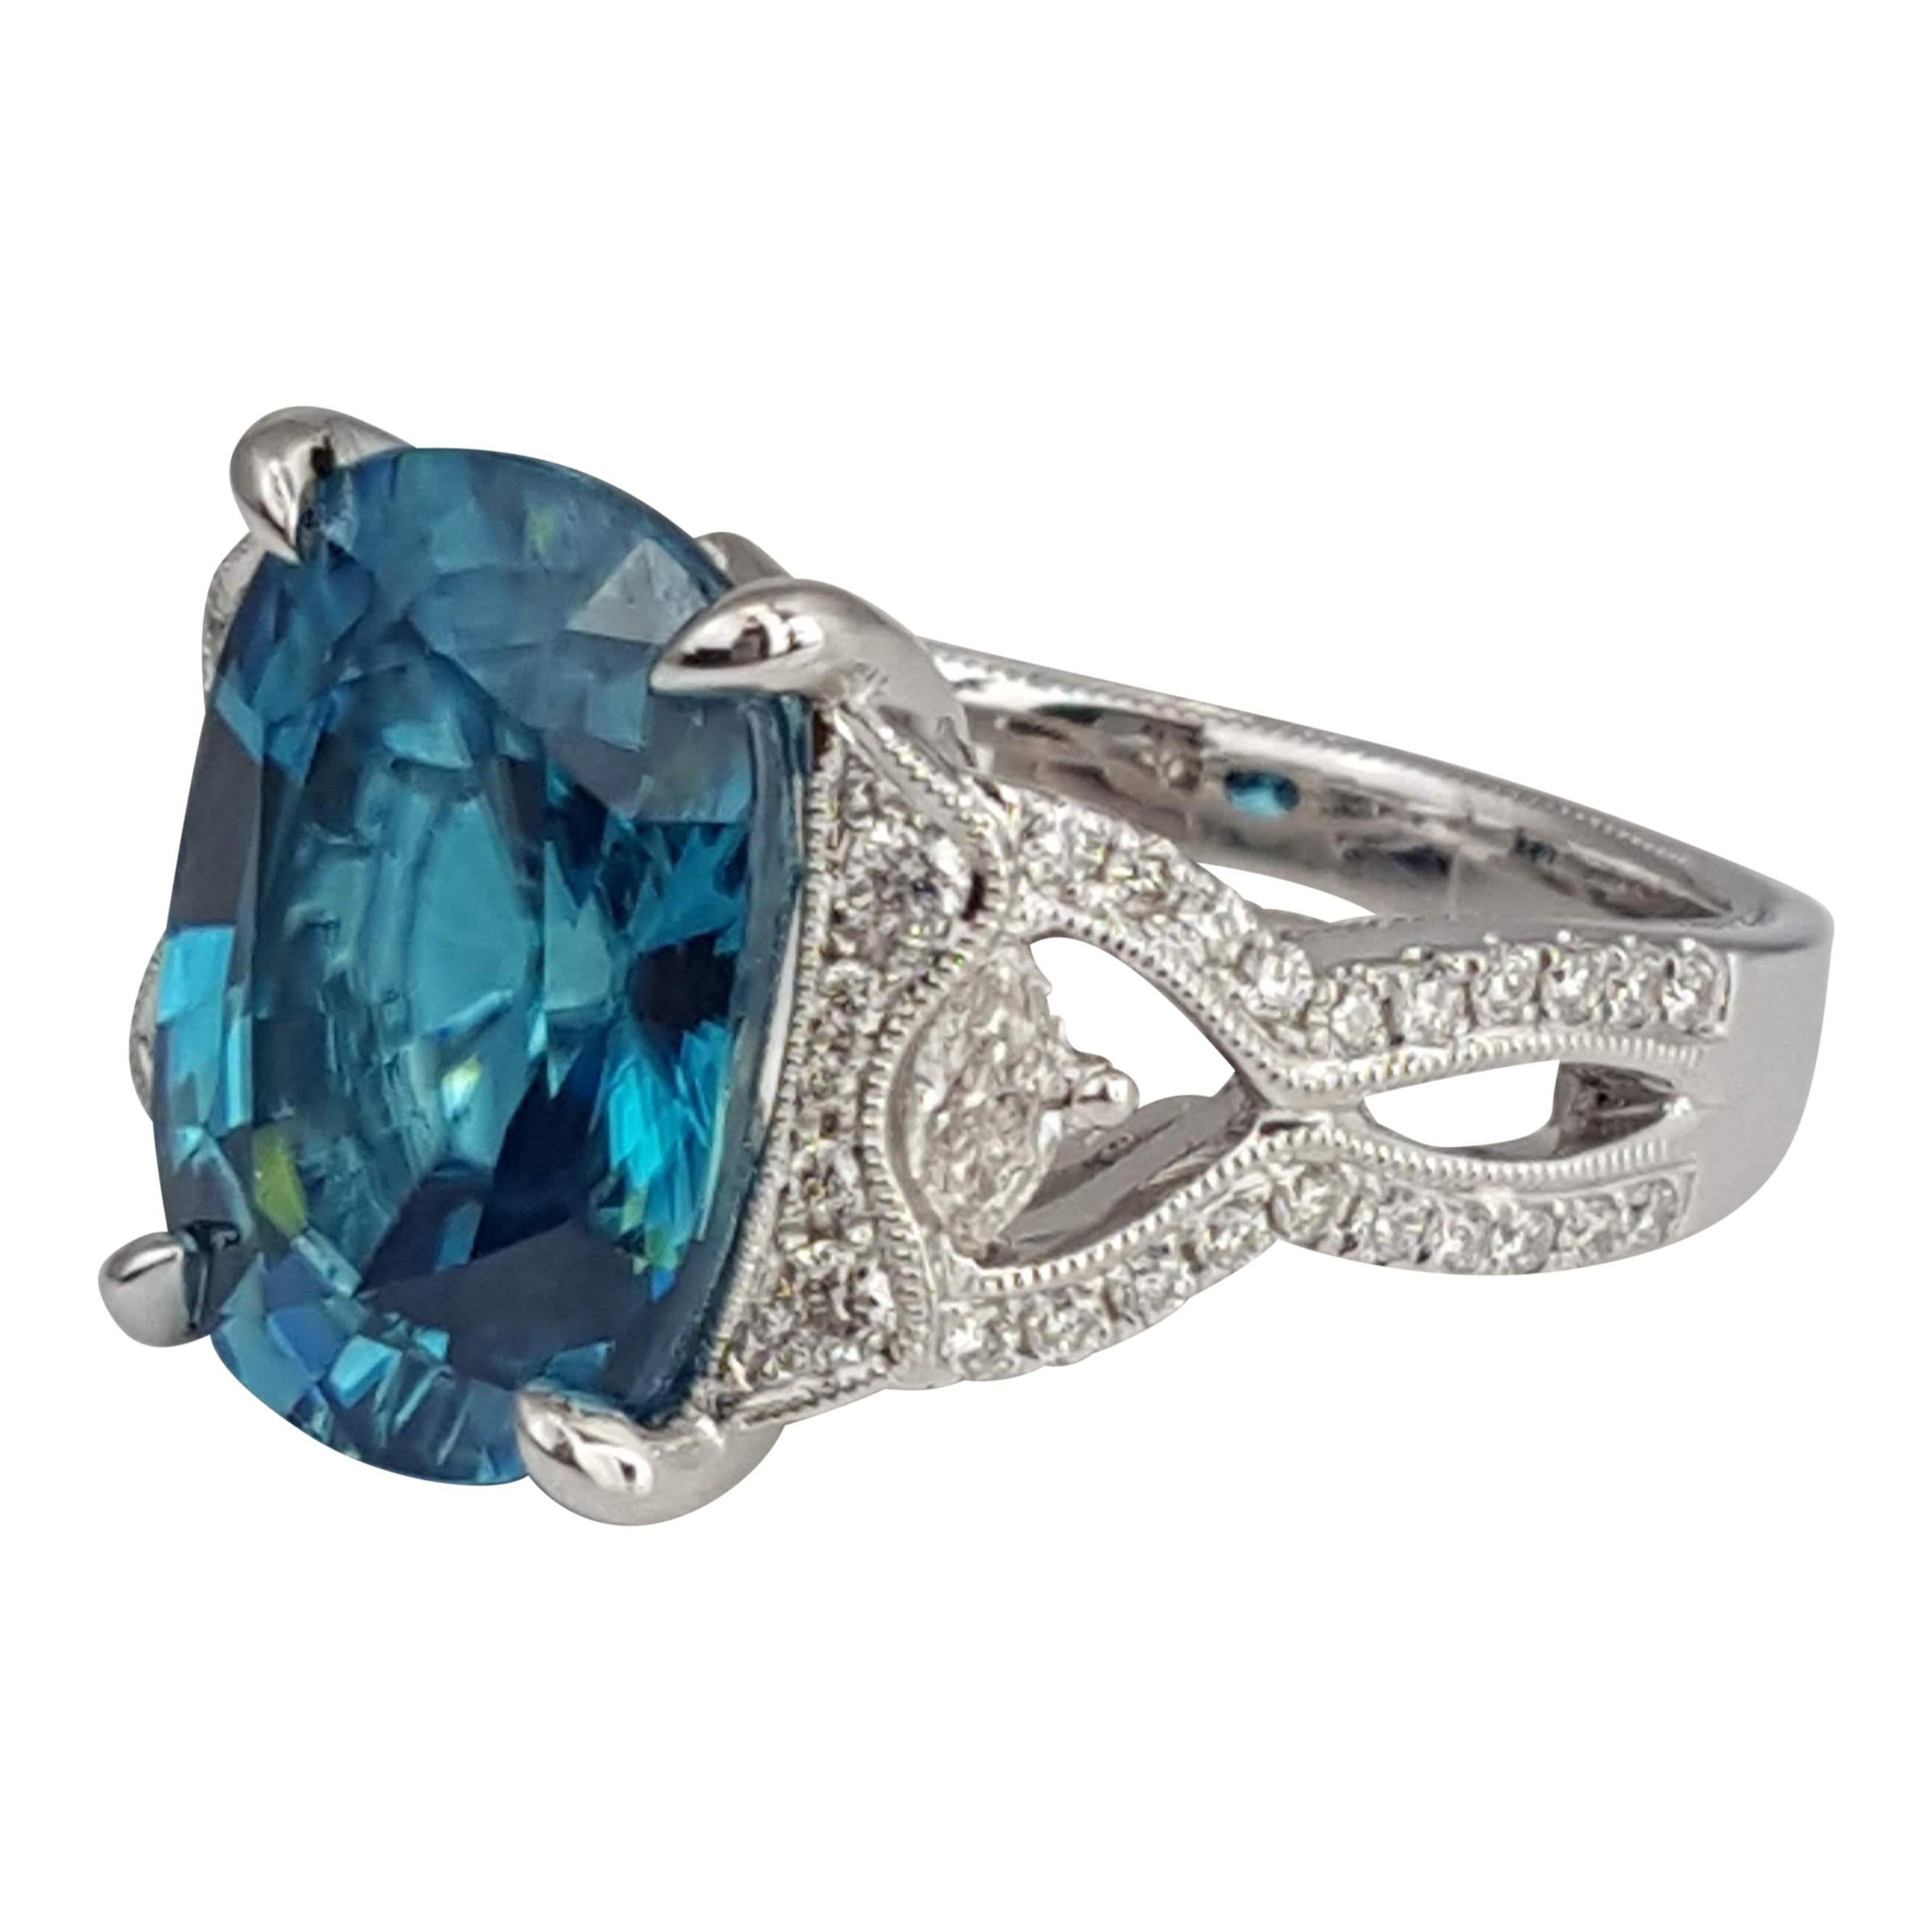 Exuding mesmerizing charm, this ring features a captivating 9.98 carat oval-cut blue zircon as its centerpiece, radiating brilliance and encircled by a stunning ensemble of 0.54 carats of natural diamonds. The meticulous craftsmanship is evident in